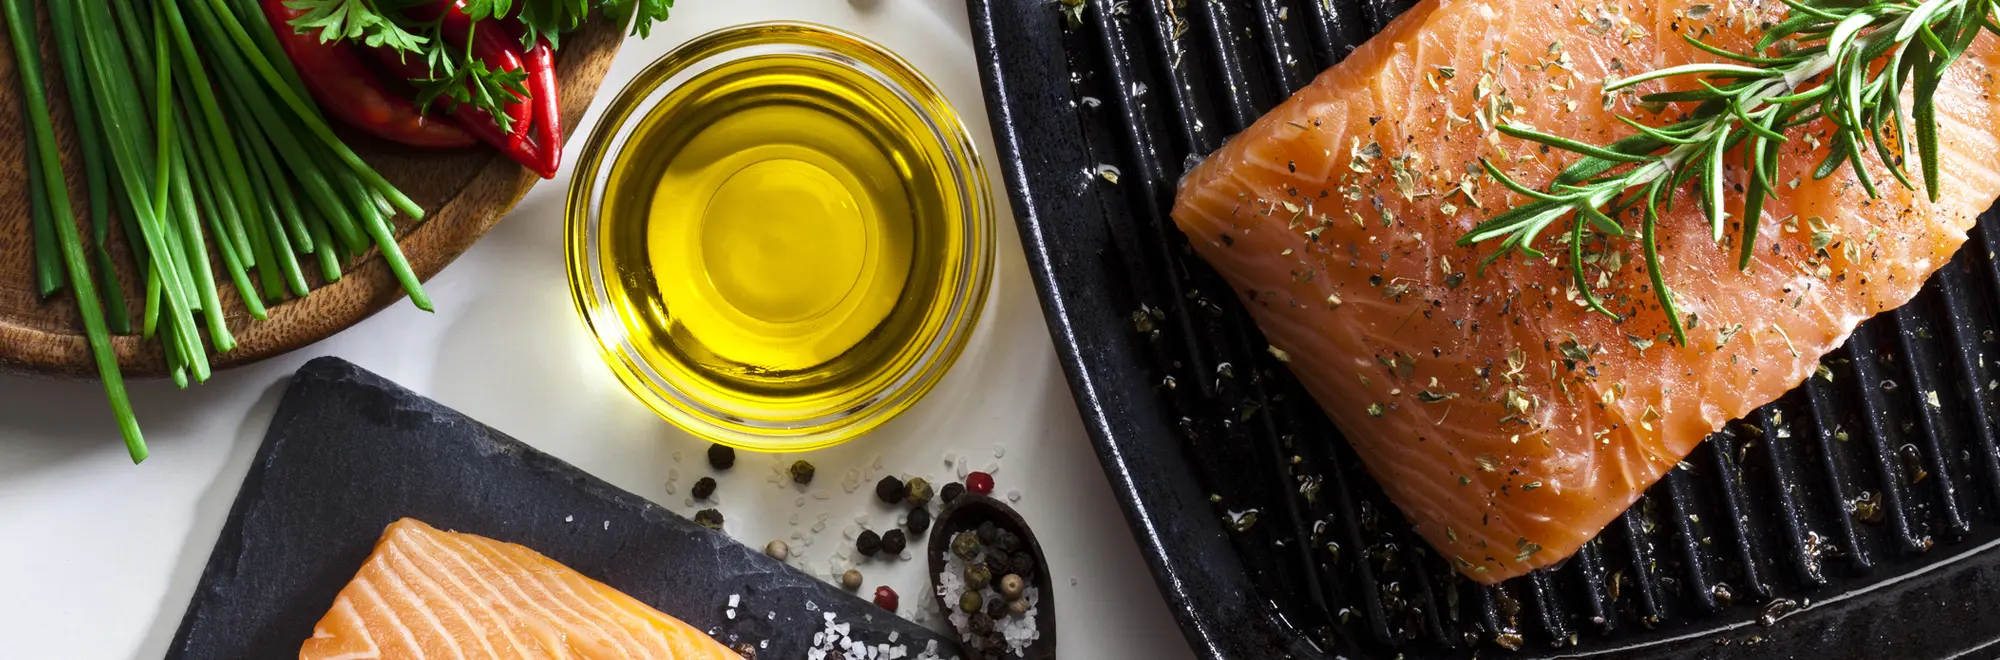 Can you cook with extra virgin olive oil?